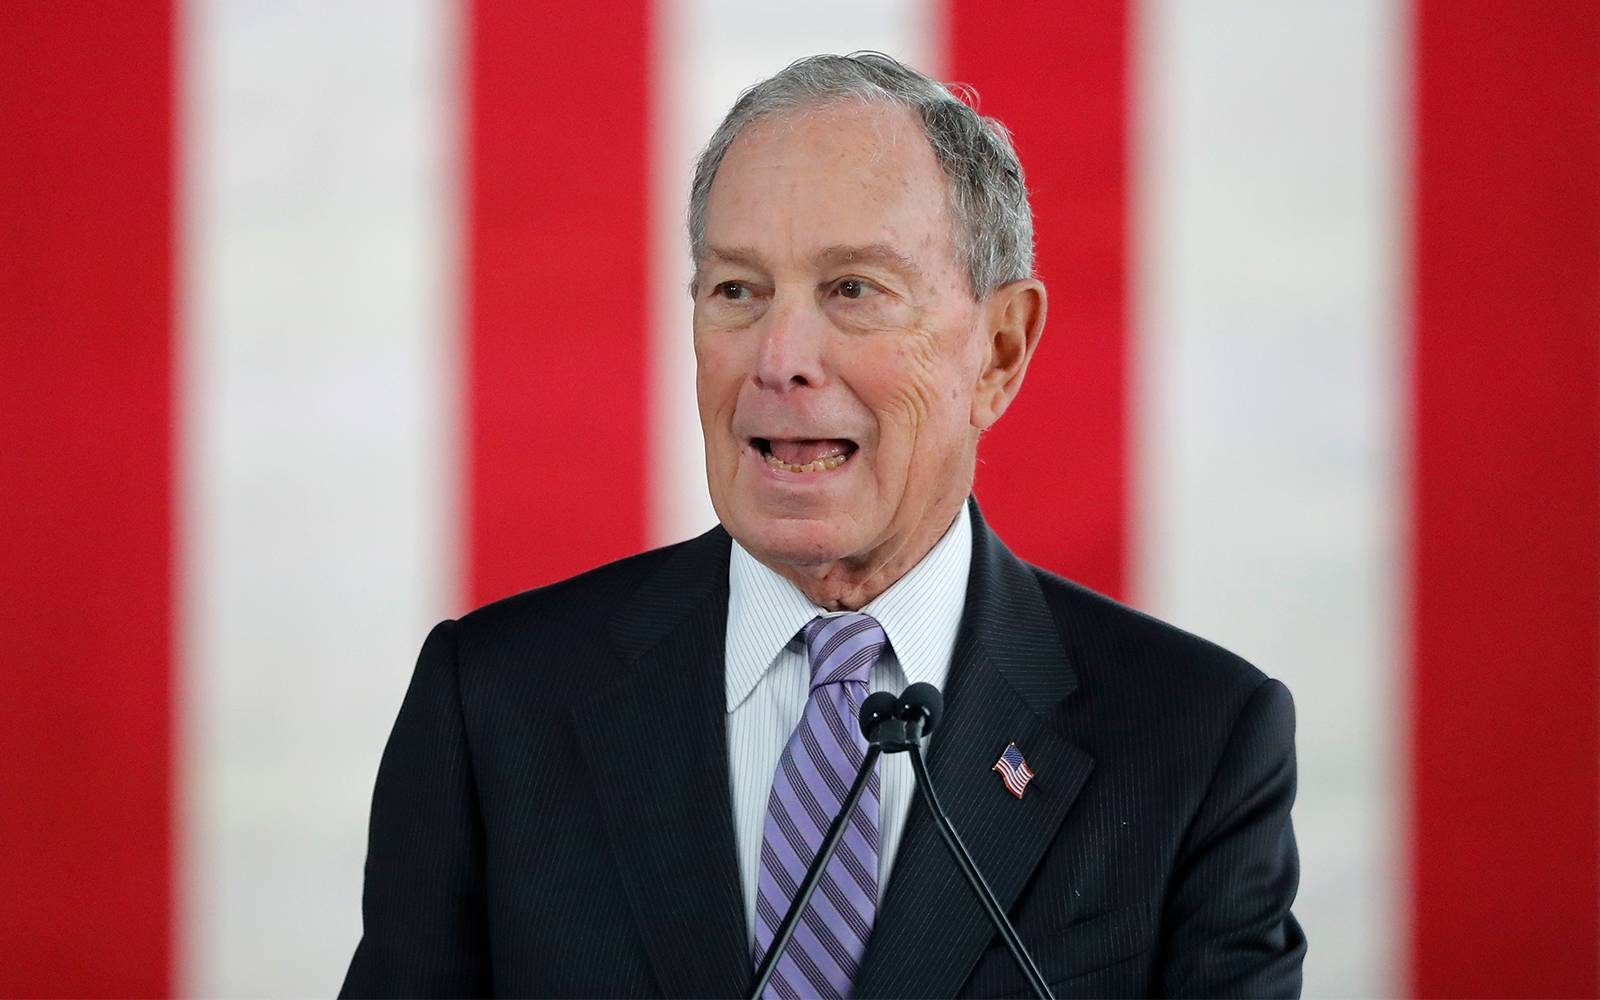 Democratic presidential candidate and former New York City mayor Mike Bloomberg speaks at a campaign event in Raleigh, North Carolina, in this Feb. 13, 2020 file photo. — AFP 